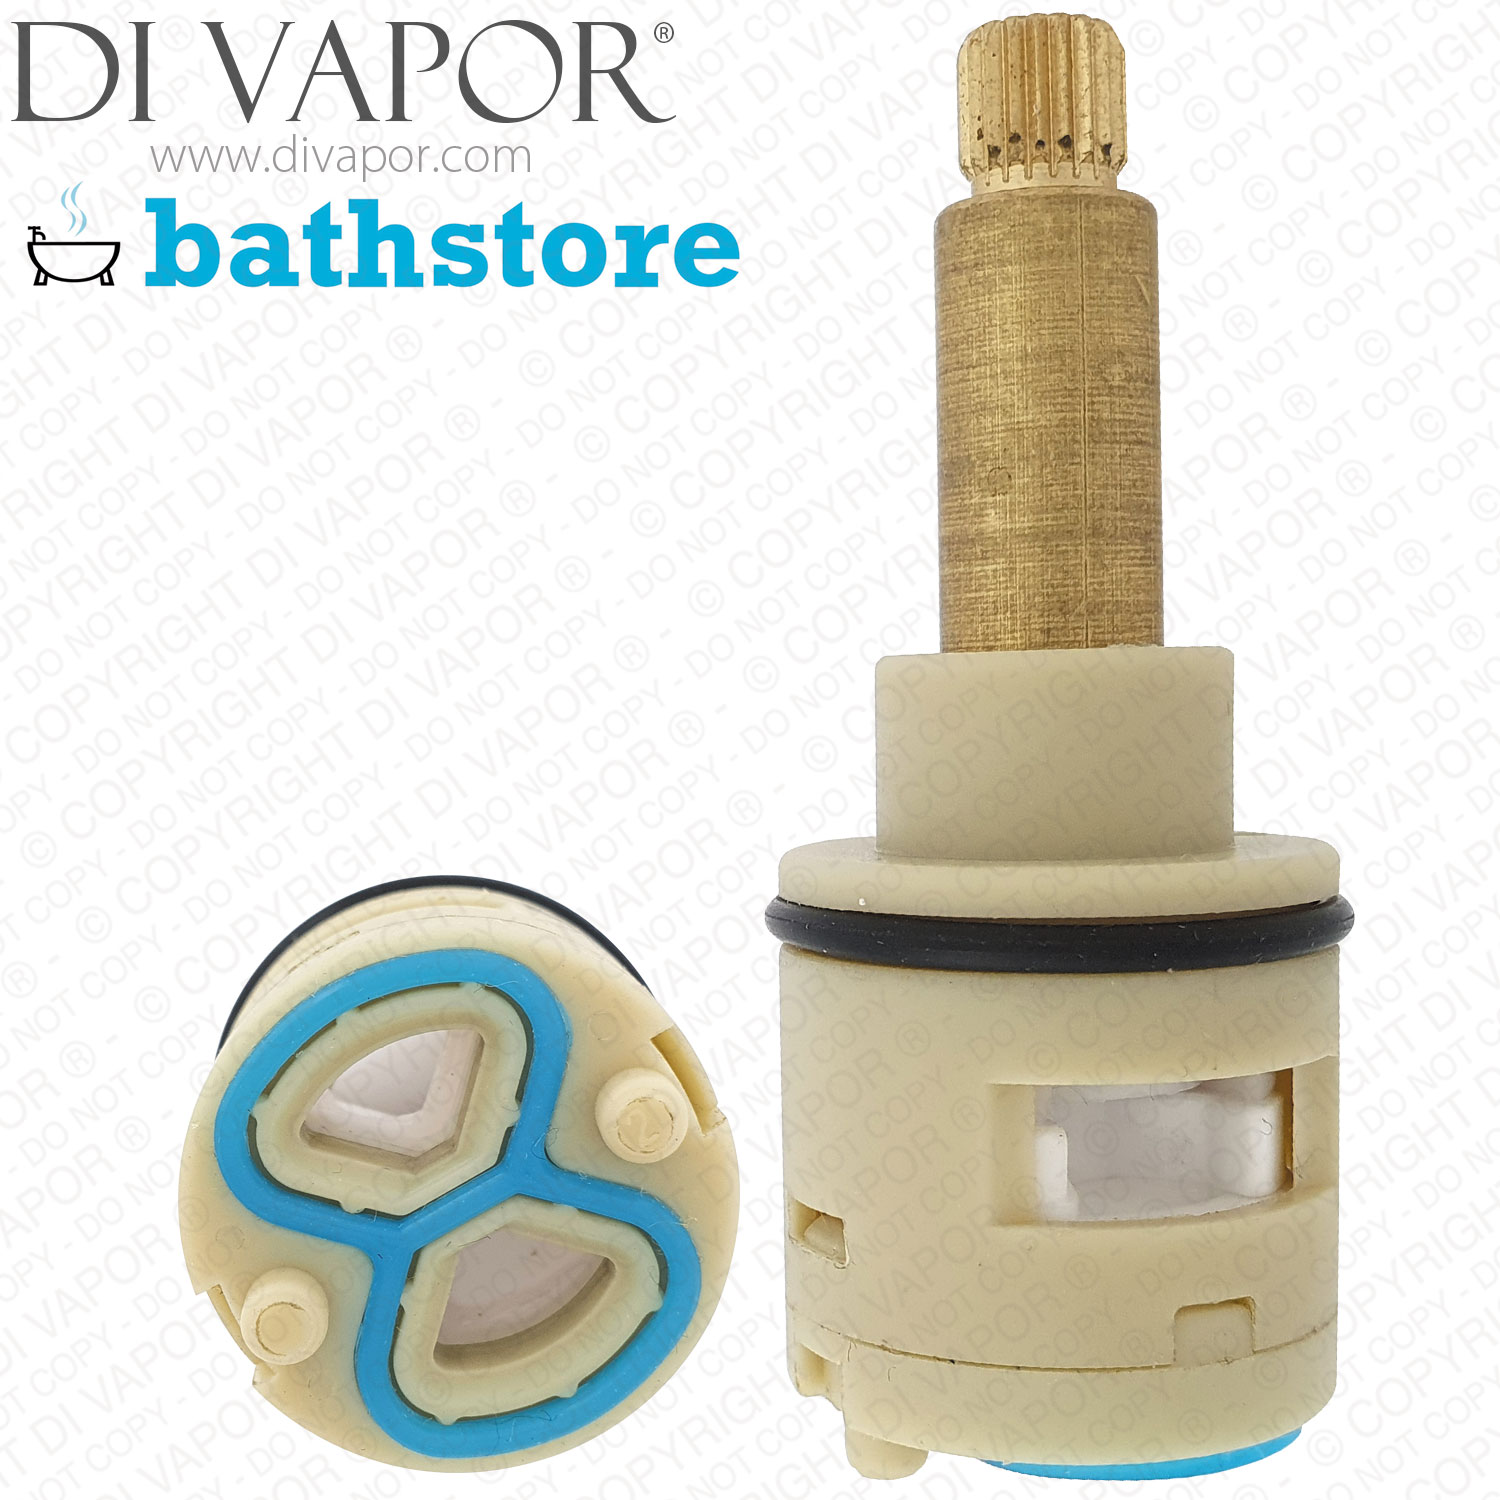 Bathstore 25mm Diverter Cartridge for Metro 20007013014 Touch Safe Mixer Two Outlet - 9000074540